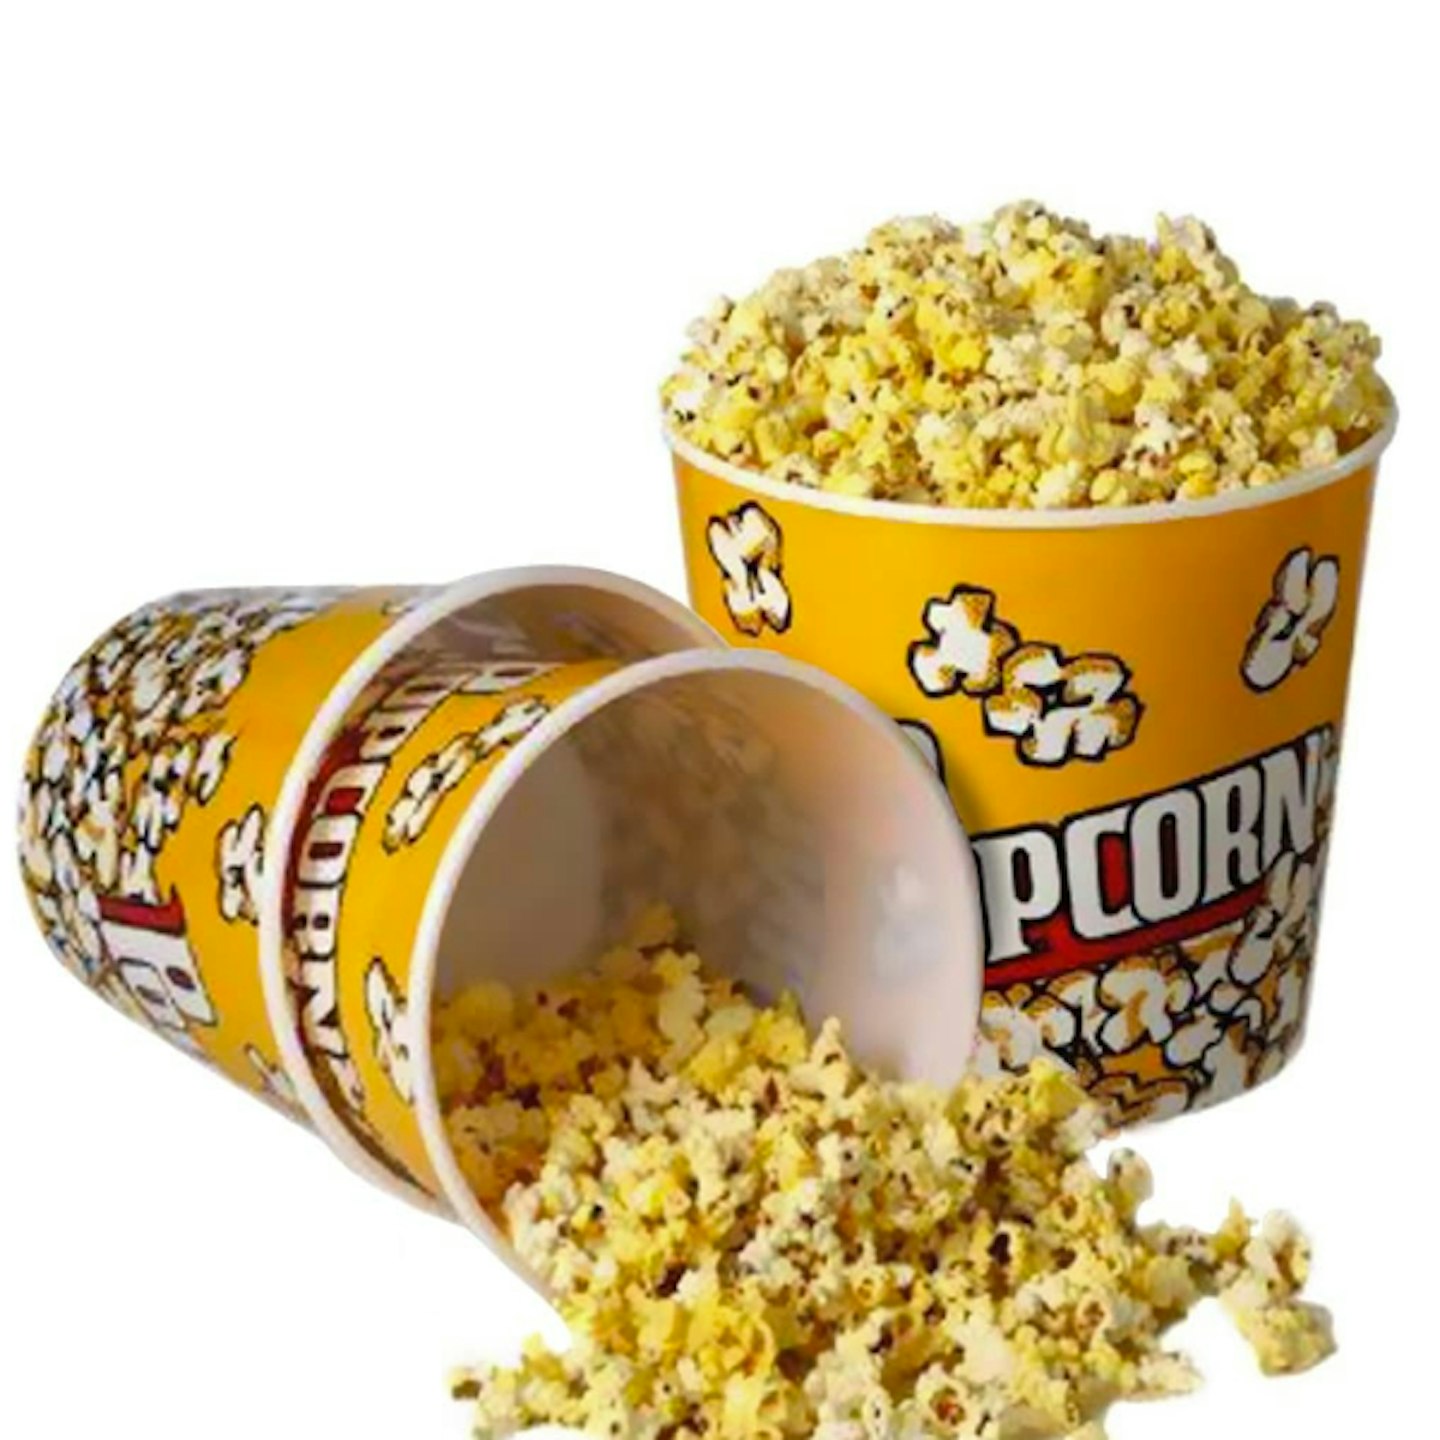 Retro Popcorn Containers Reusable (3 pack)